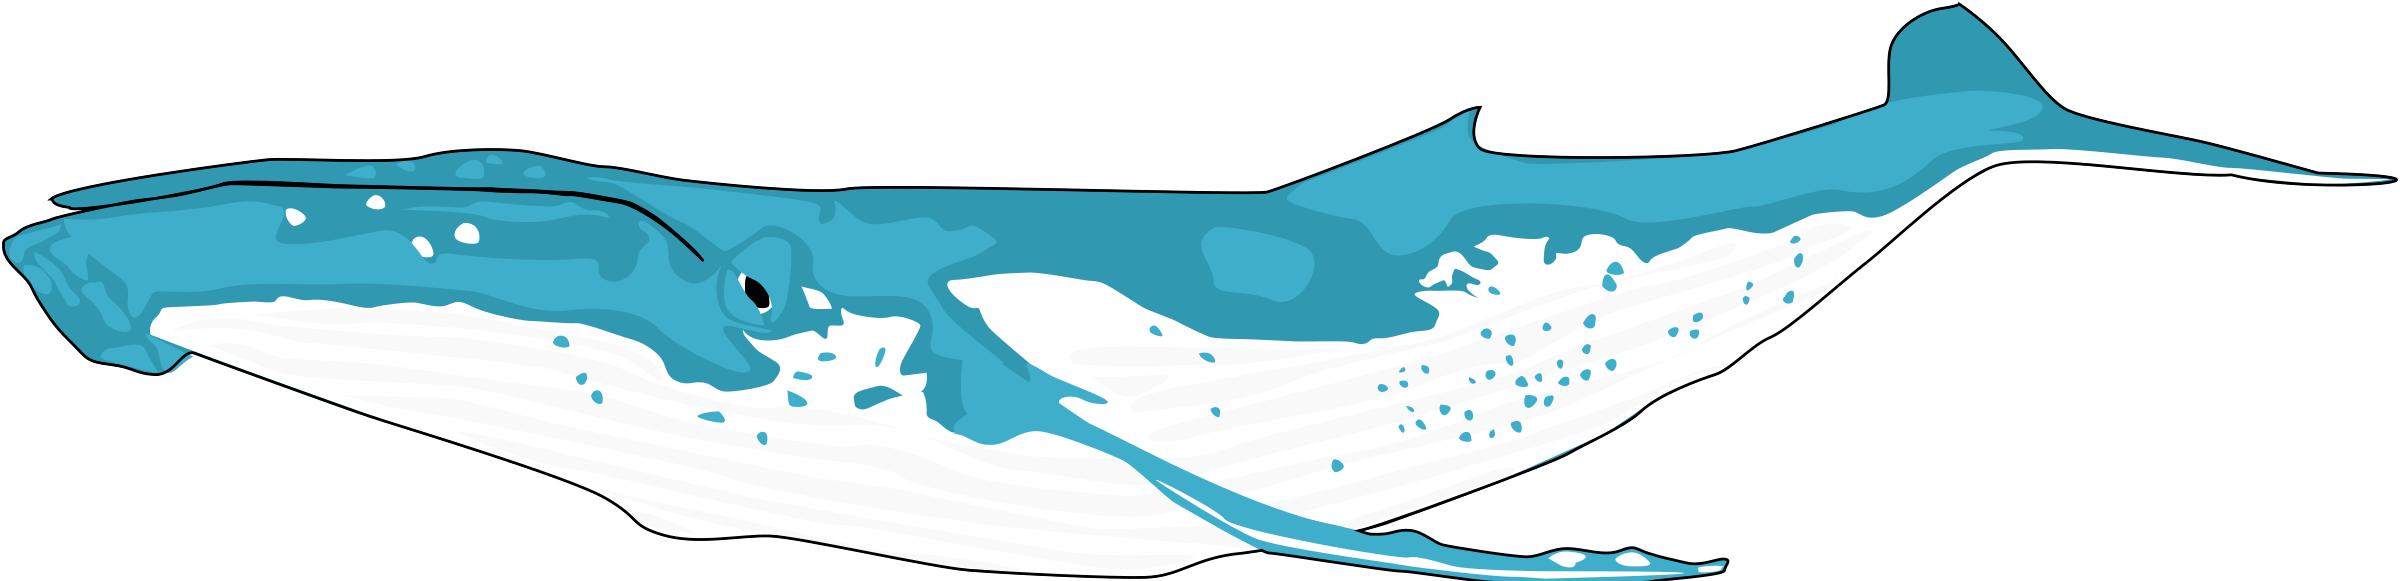 humpback whale PNG icons